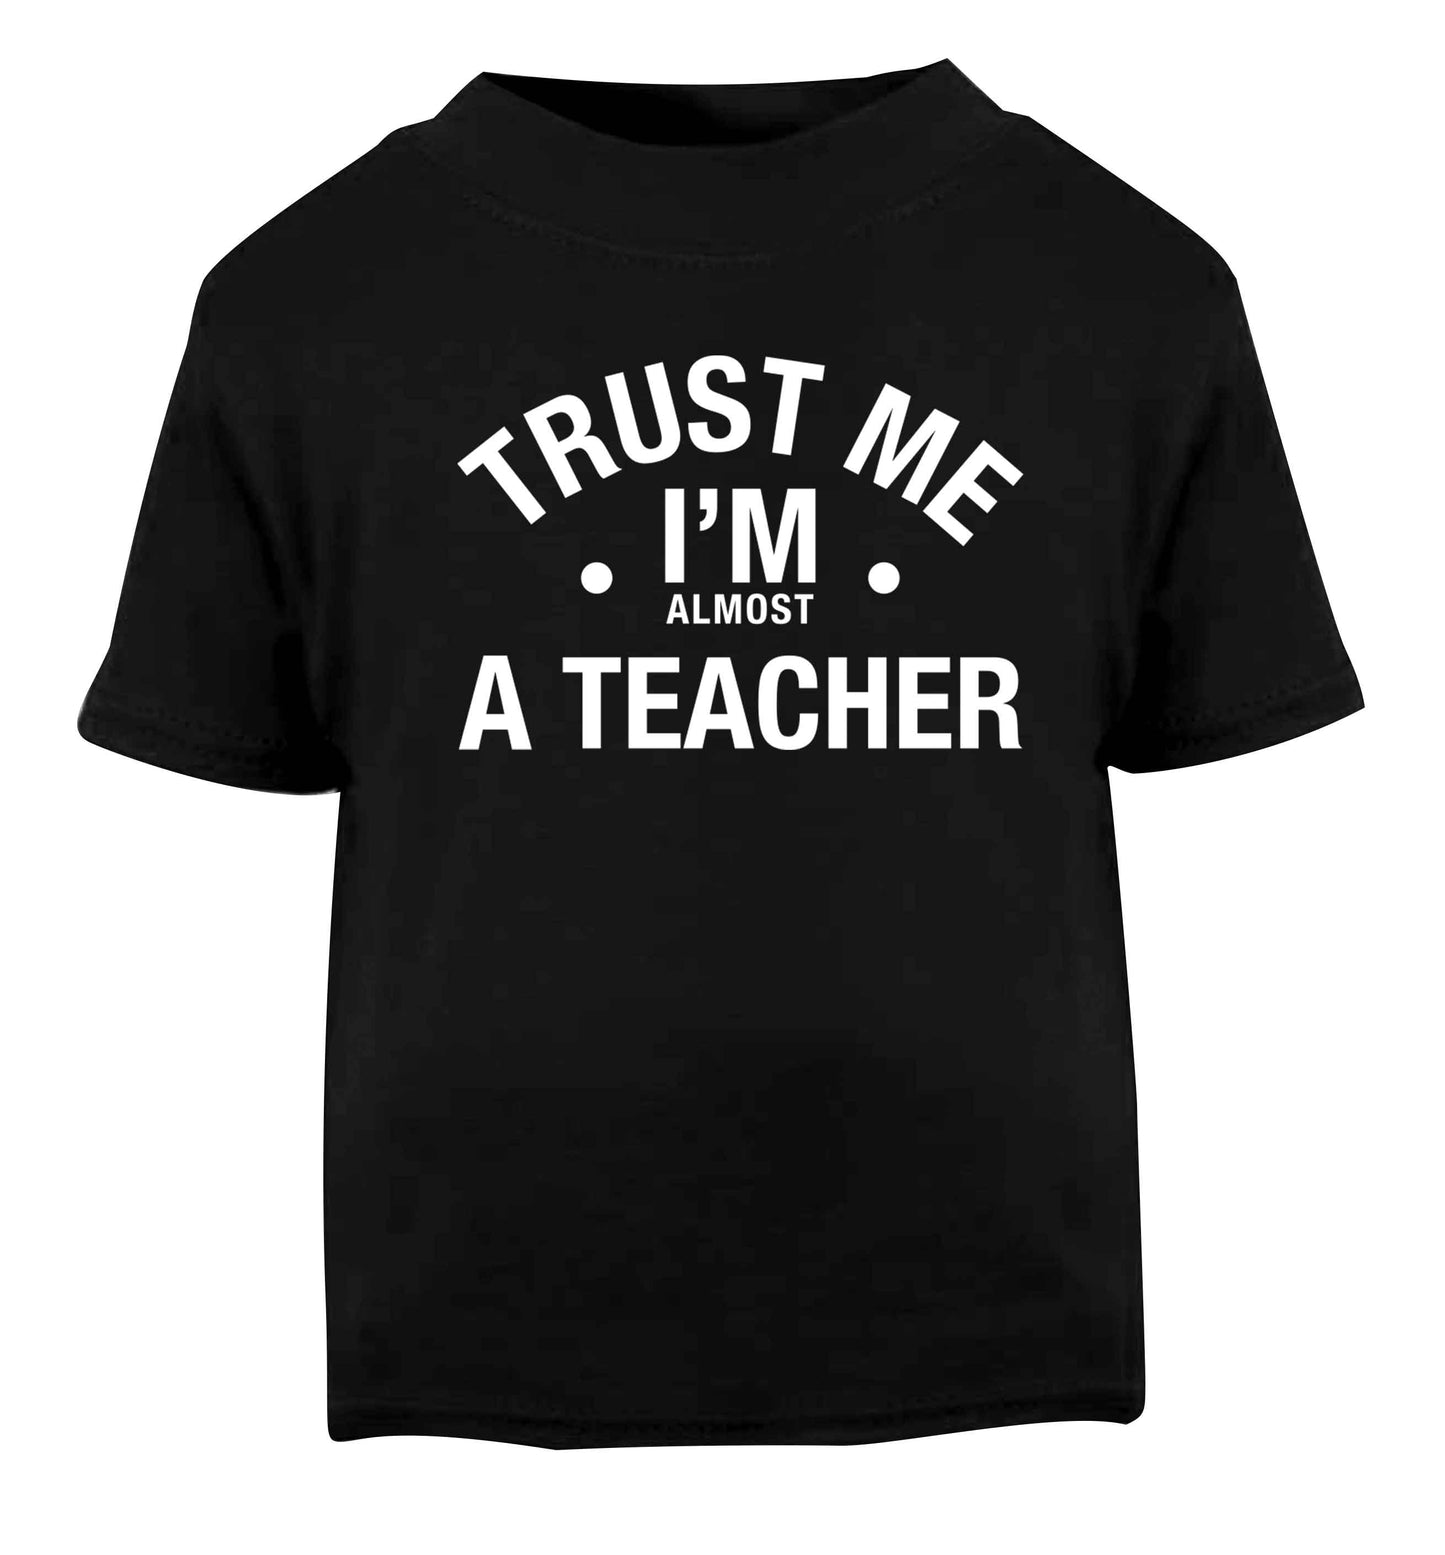 Trust me I'm almost a teacher Black baby toddler Tshirt 2 years